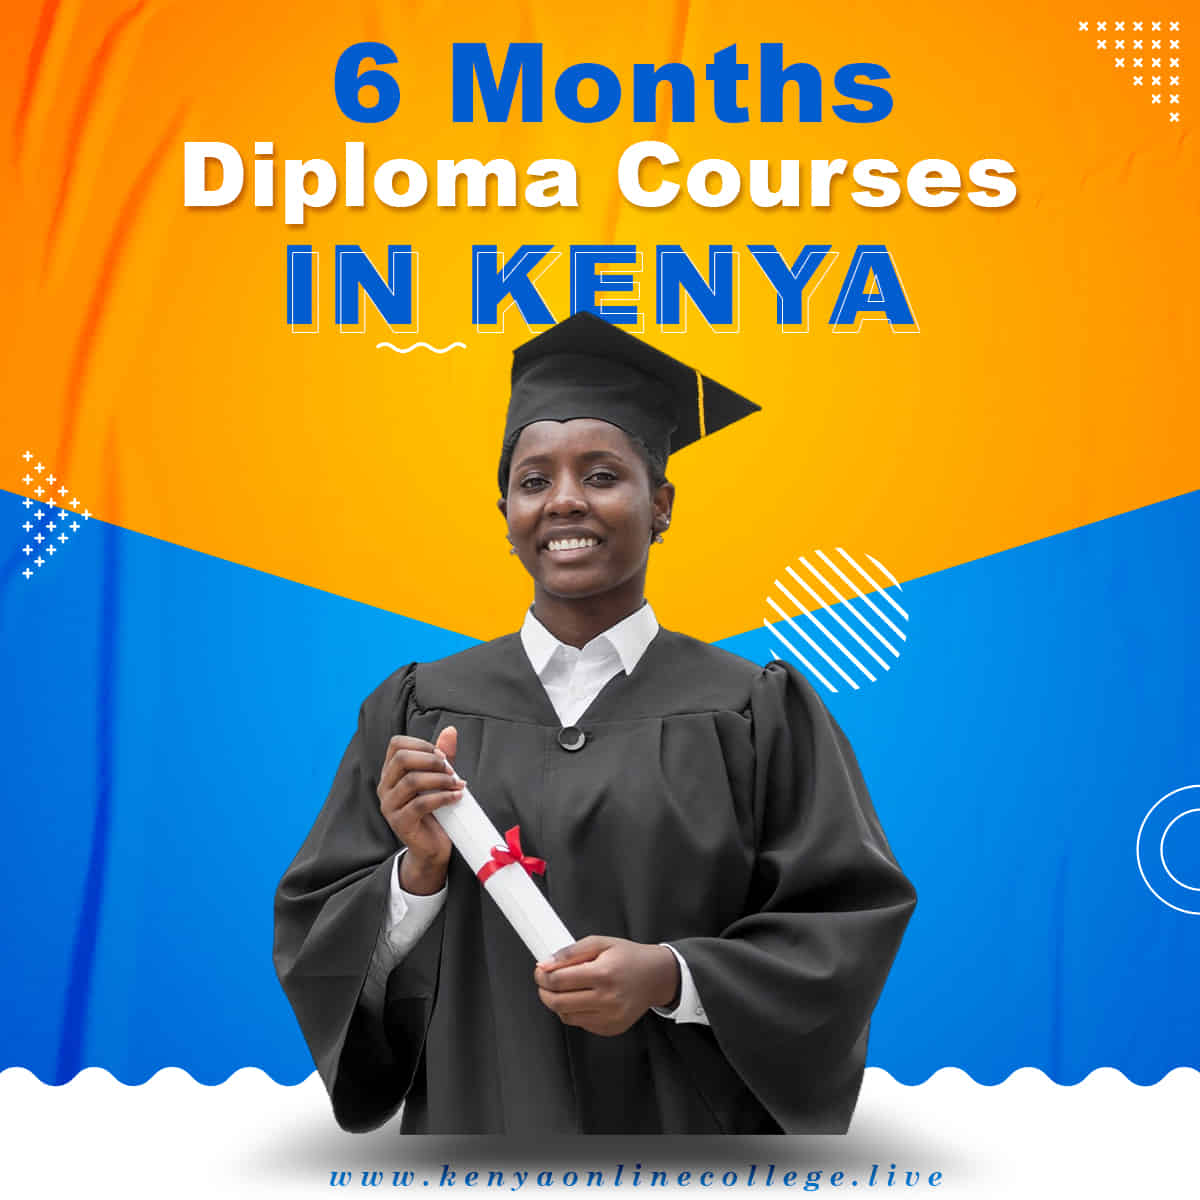 6 months diploma courses in Kenya